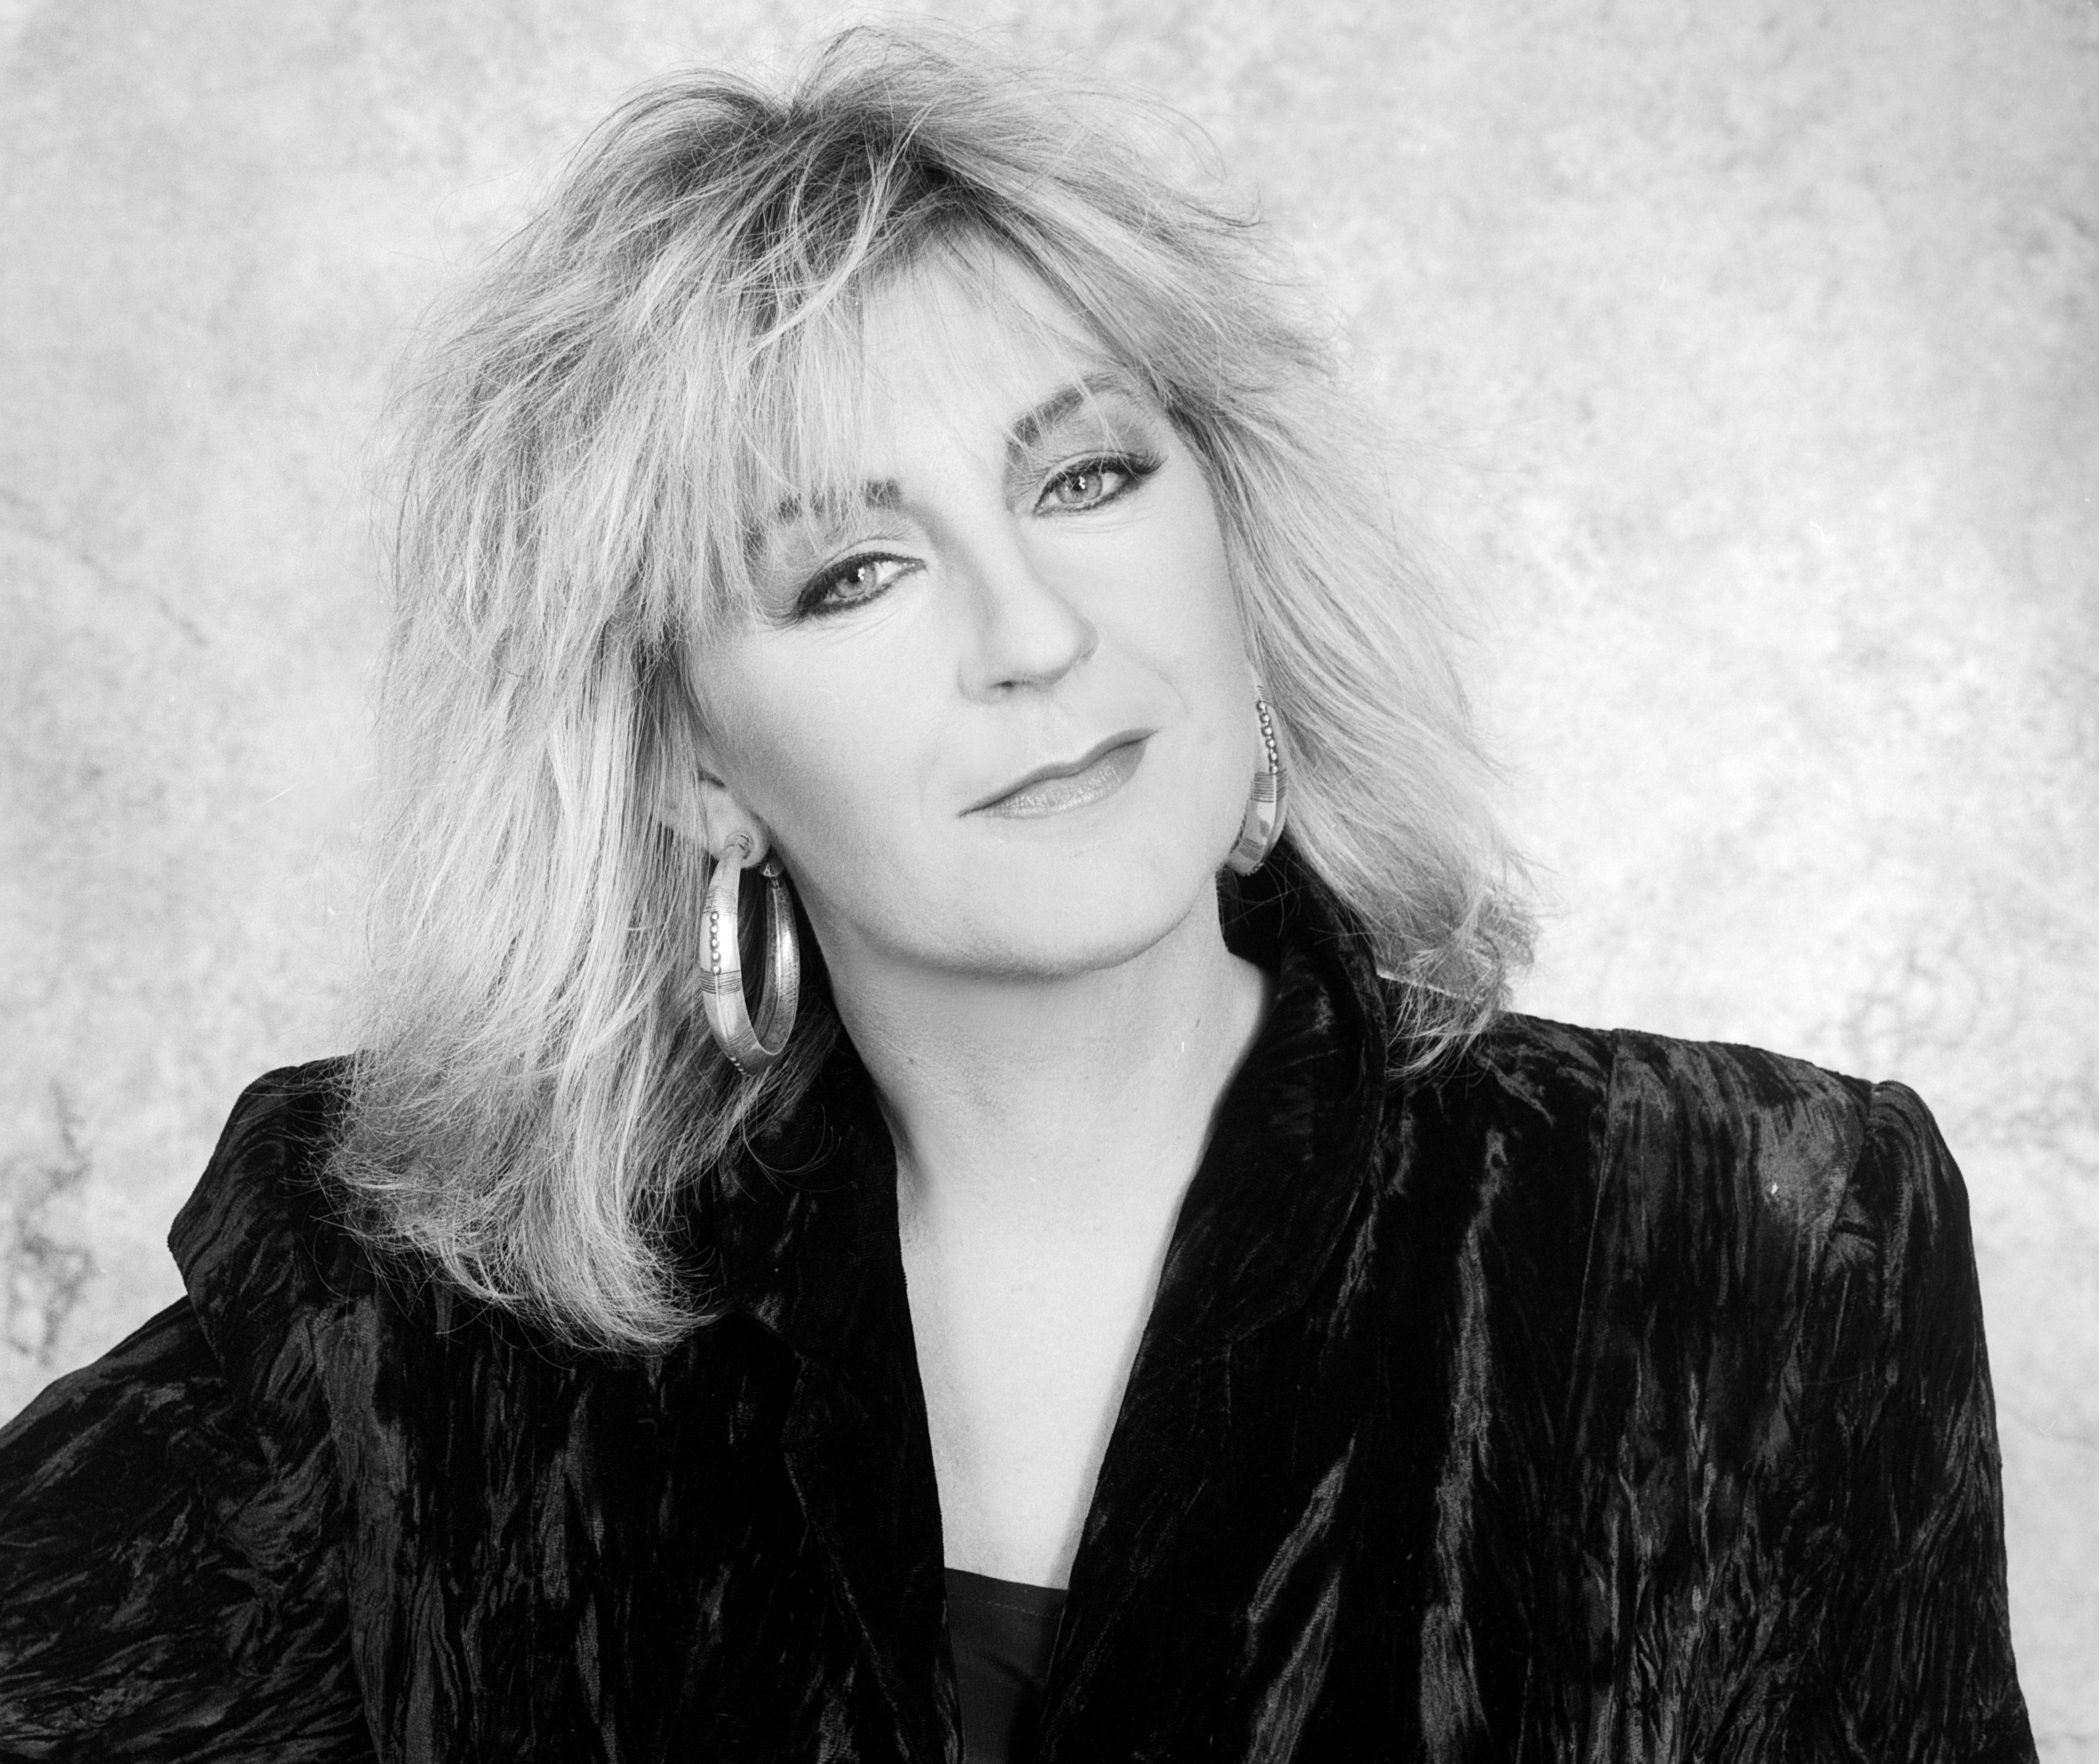 A black and white photo of Christine McVie wearing a black jacket and hoop earrings.